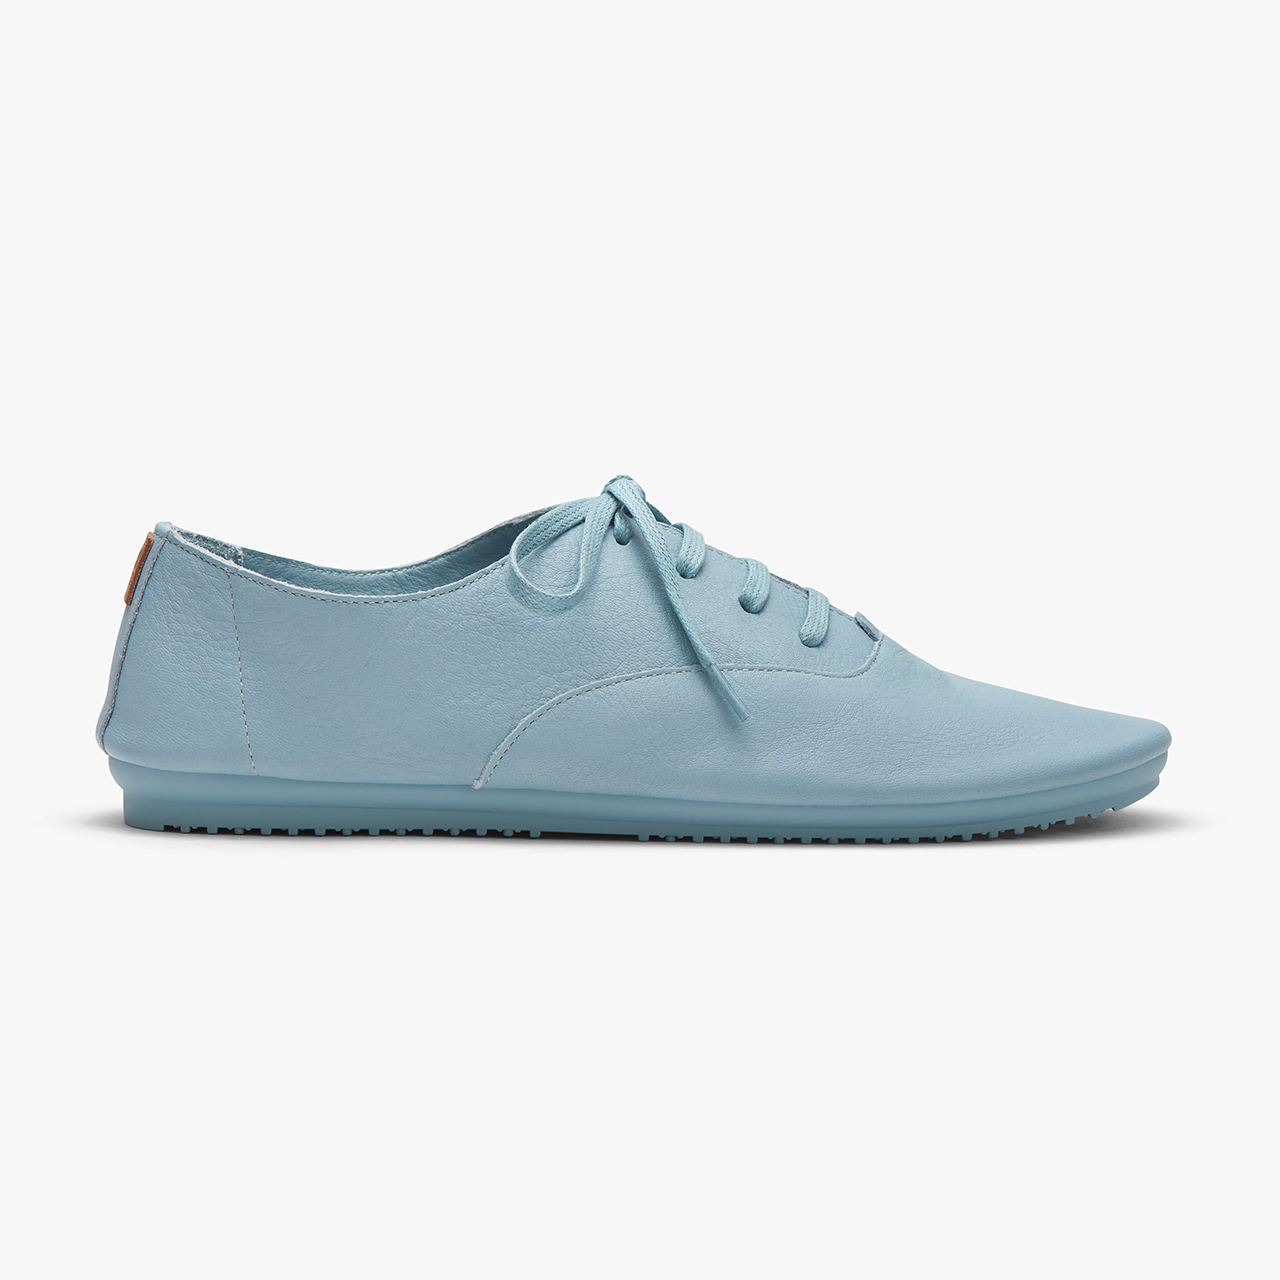 Paloma - Lake – INTL Anothersole | Best Everyday Shoes